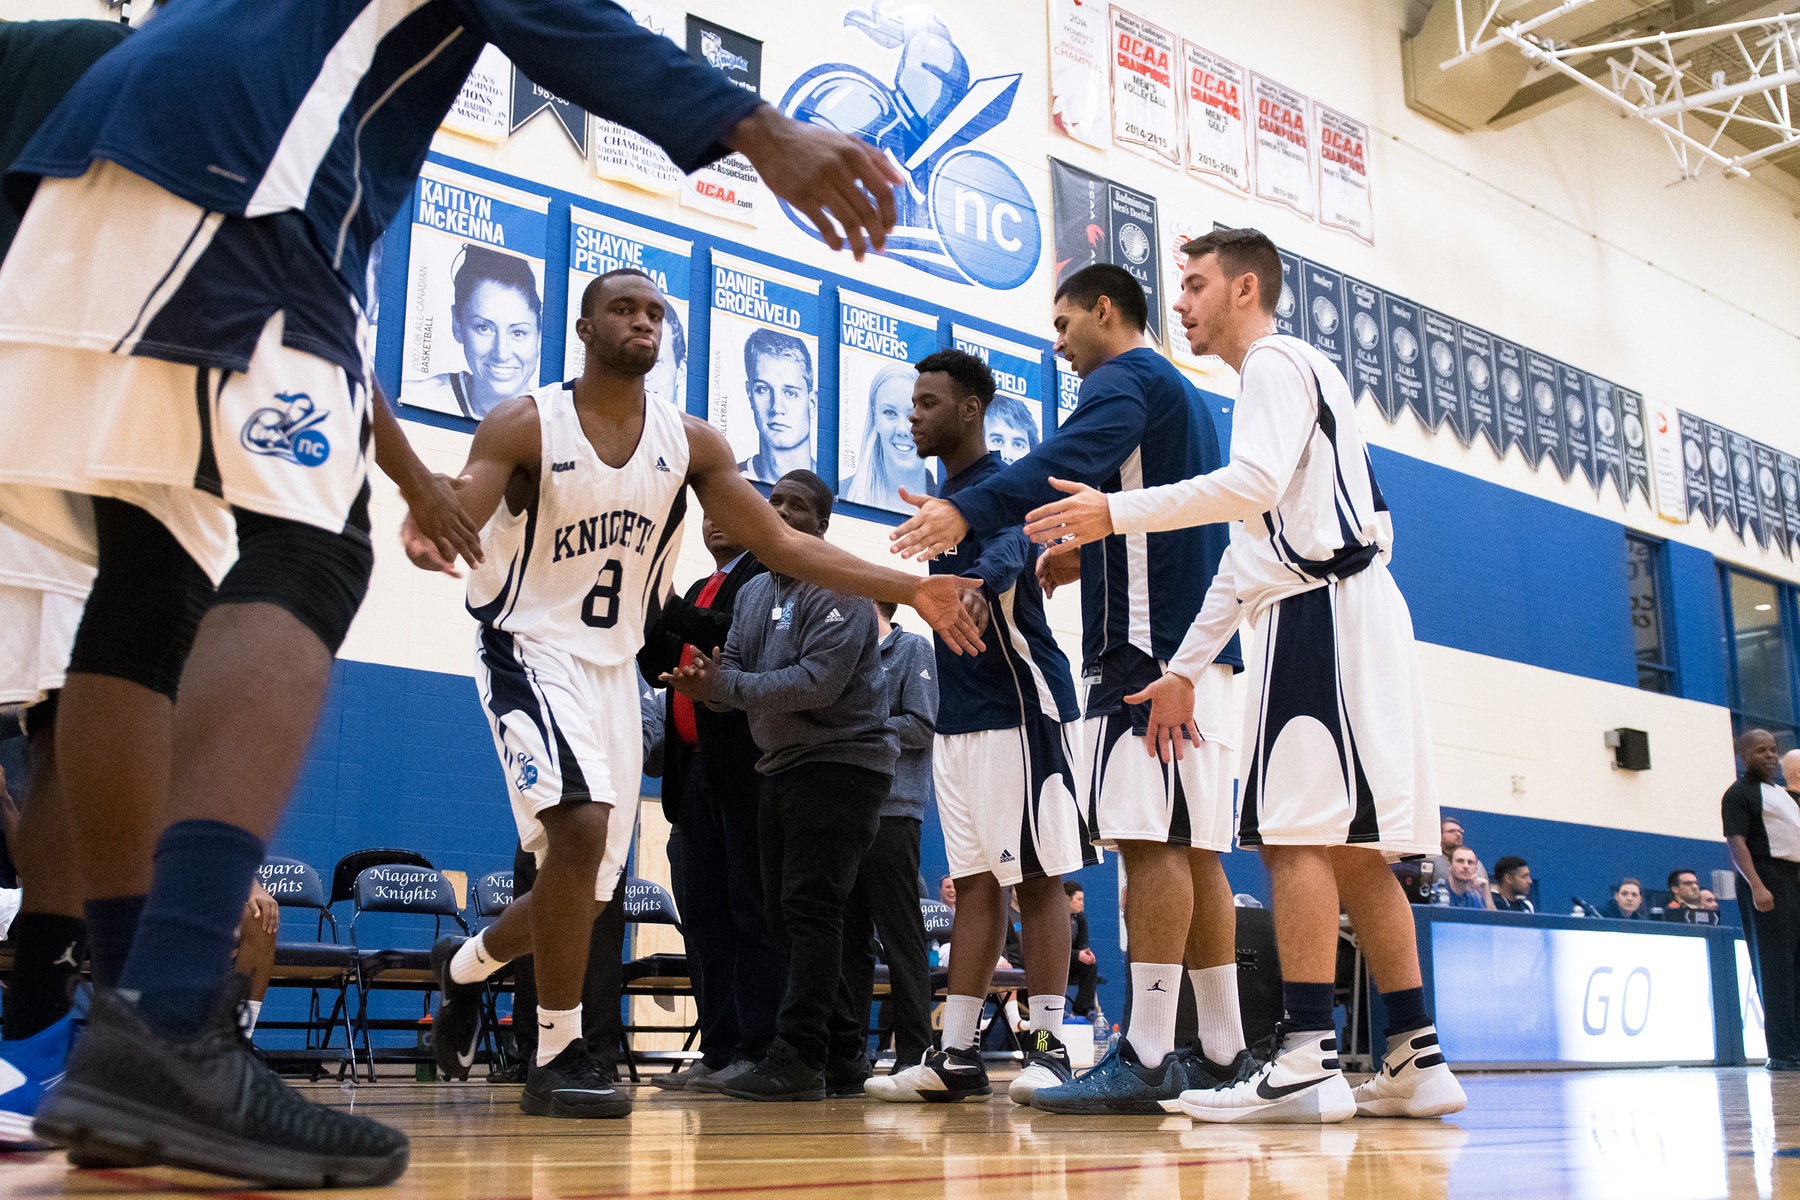 PREVIEW: No. 3 Knights men’s basketball set to battle No. 7 Humber Hawks